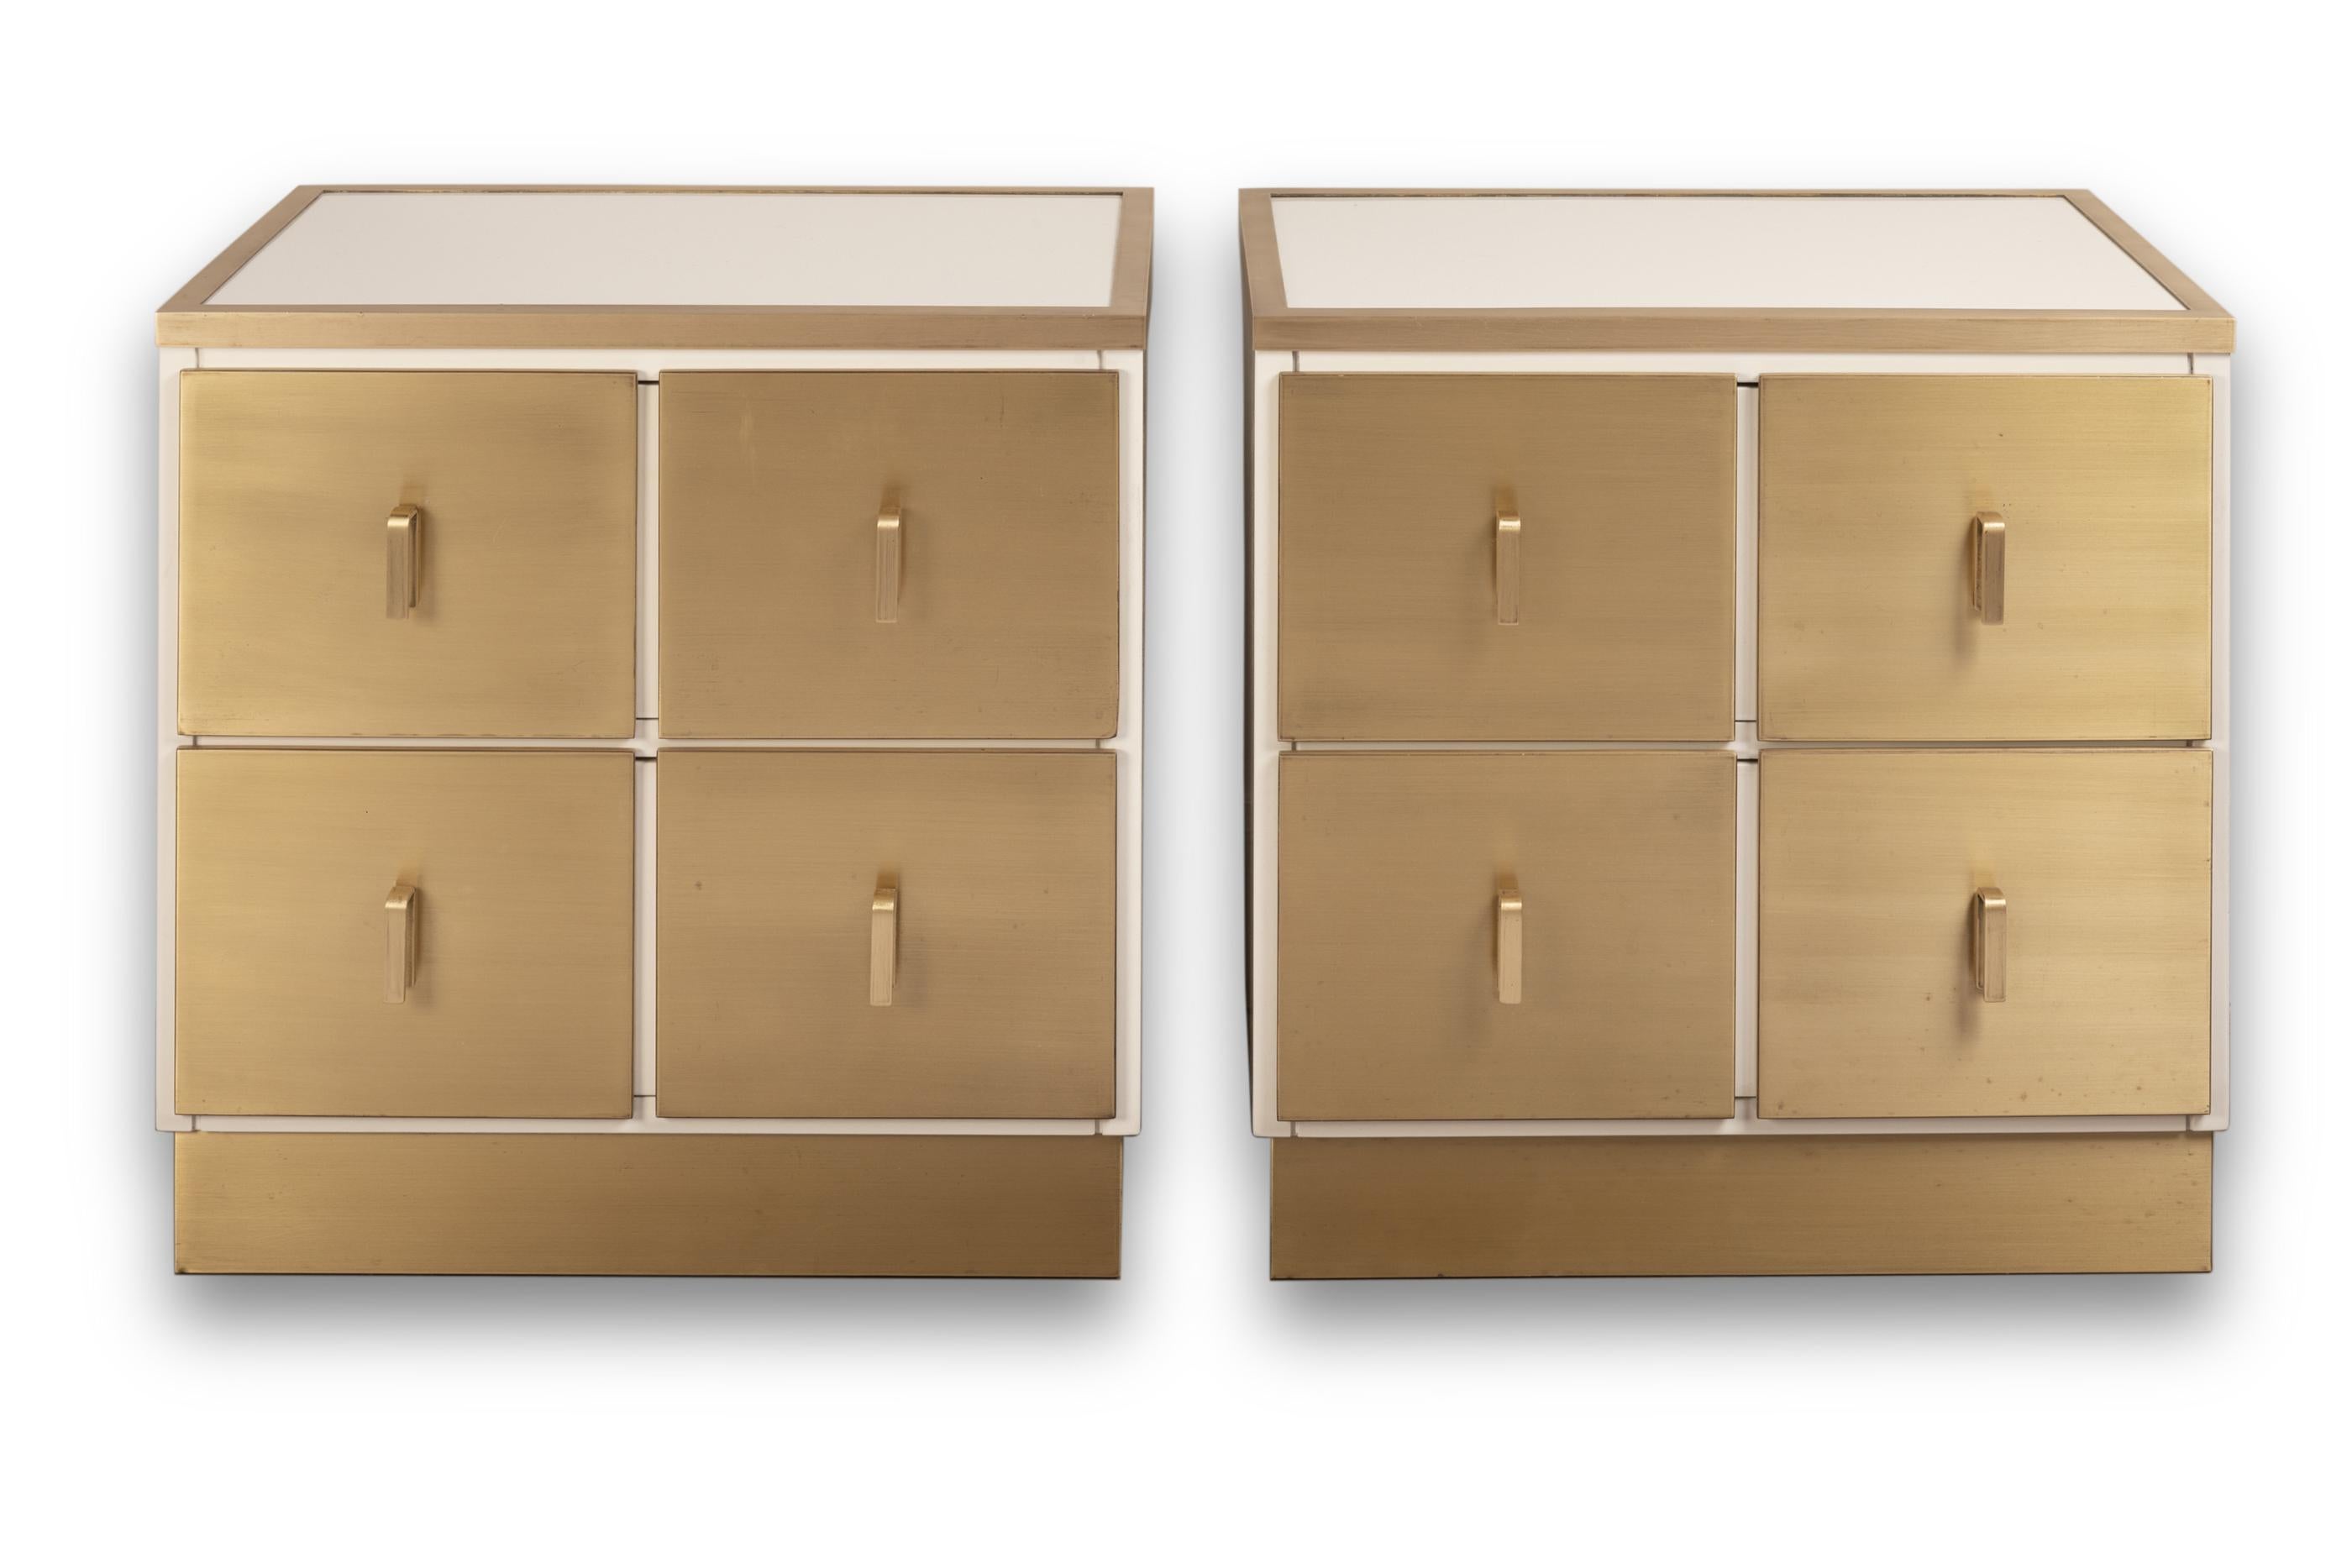 Pair of nightstands or side tables.
White lacquered wood and brass
Opens by two drawers
Design Luciano Frigerio
Made by Frigerio Di Desio, marked inside a drawer 